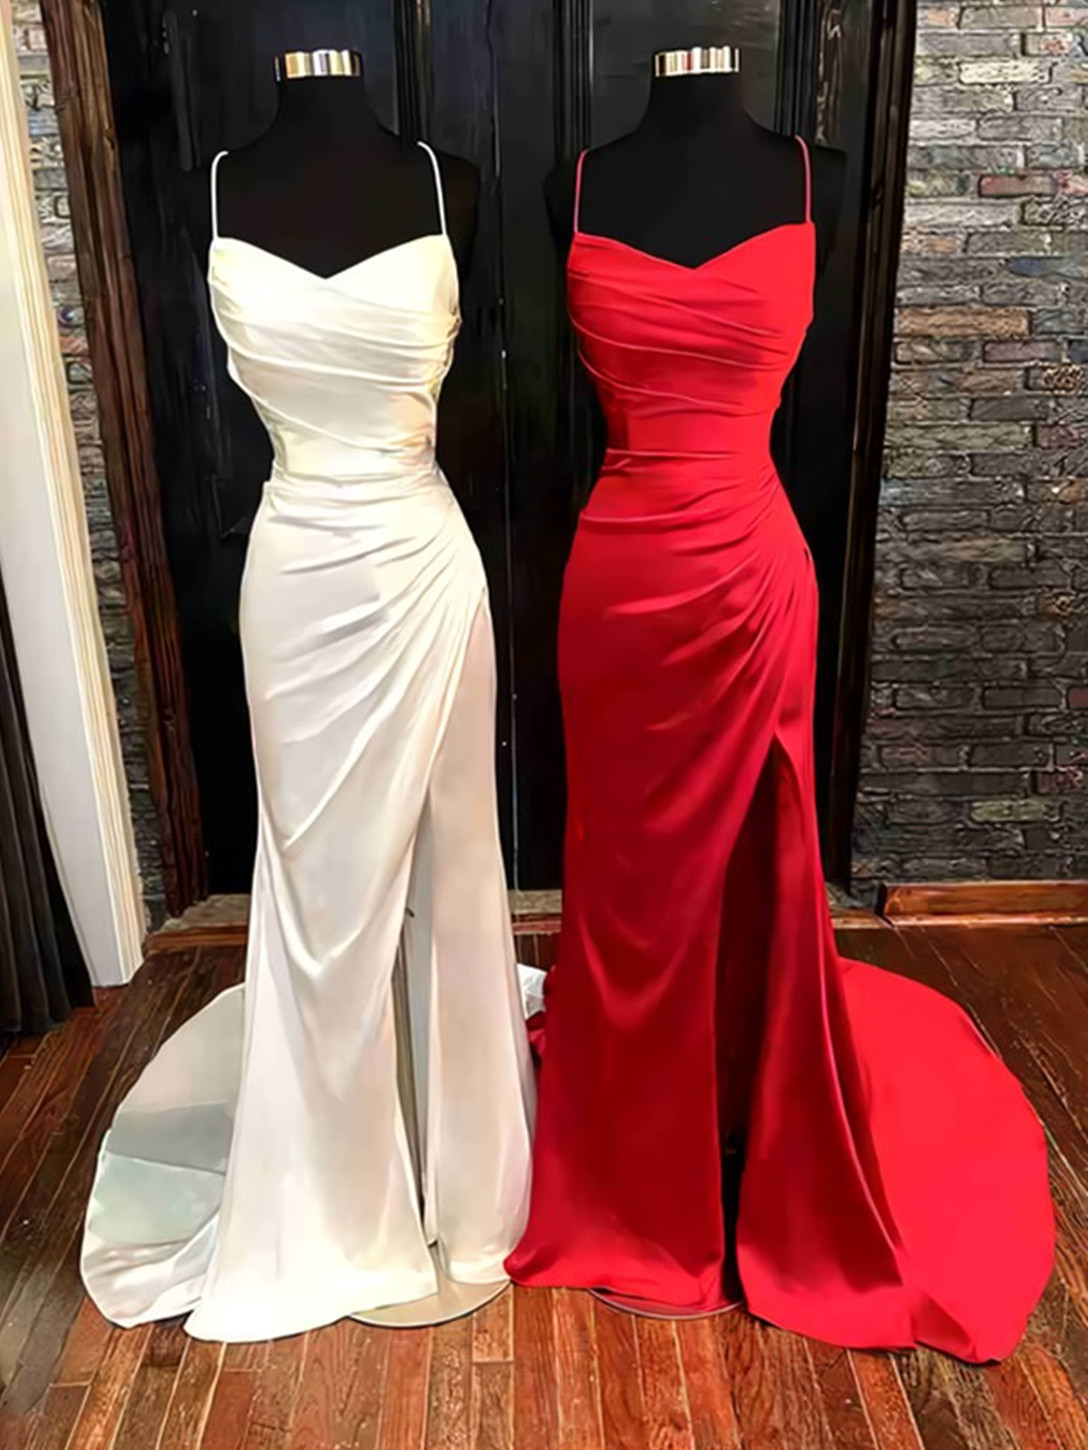 Women Sheath Satin Prom Dresses Long Spaghetti Straps Evening Gowns Sleeveless Formal Party Dress Yp012